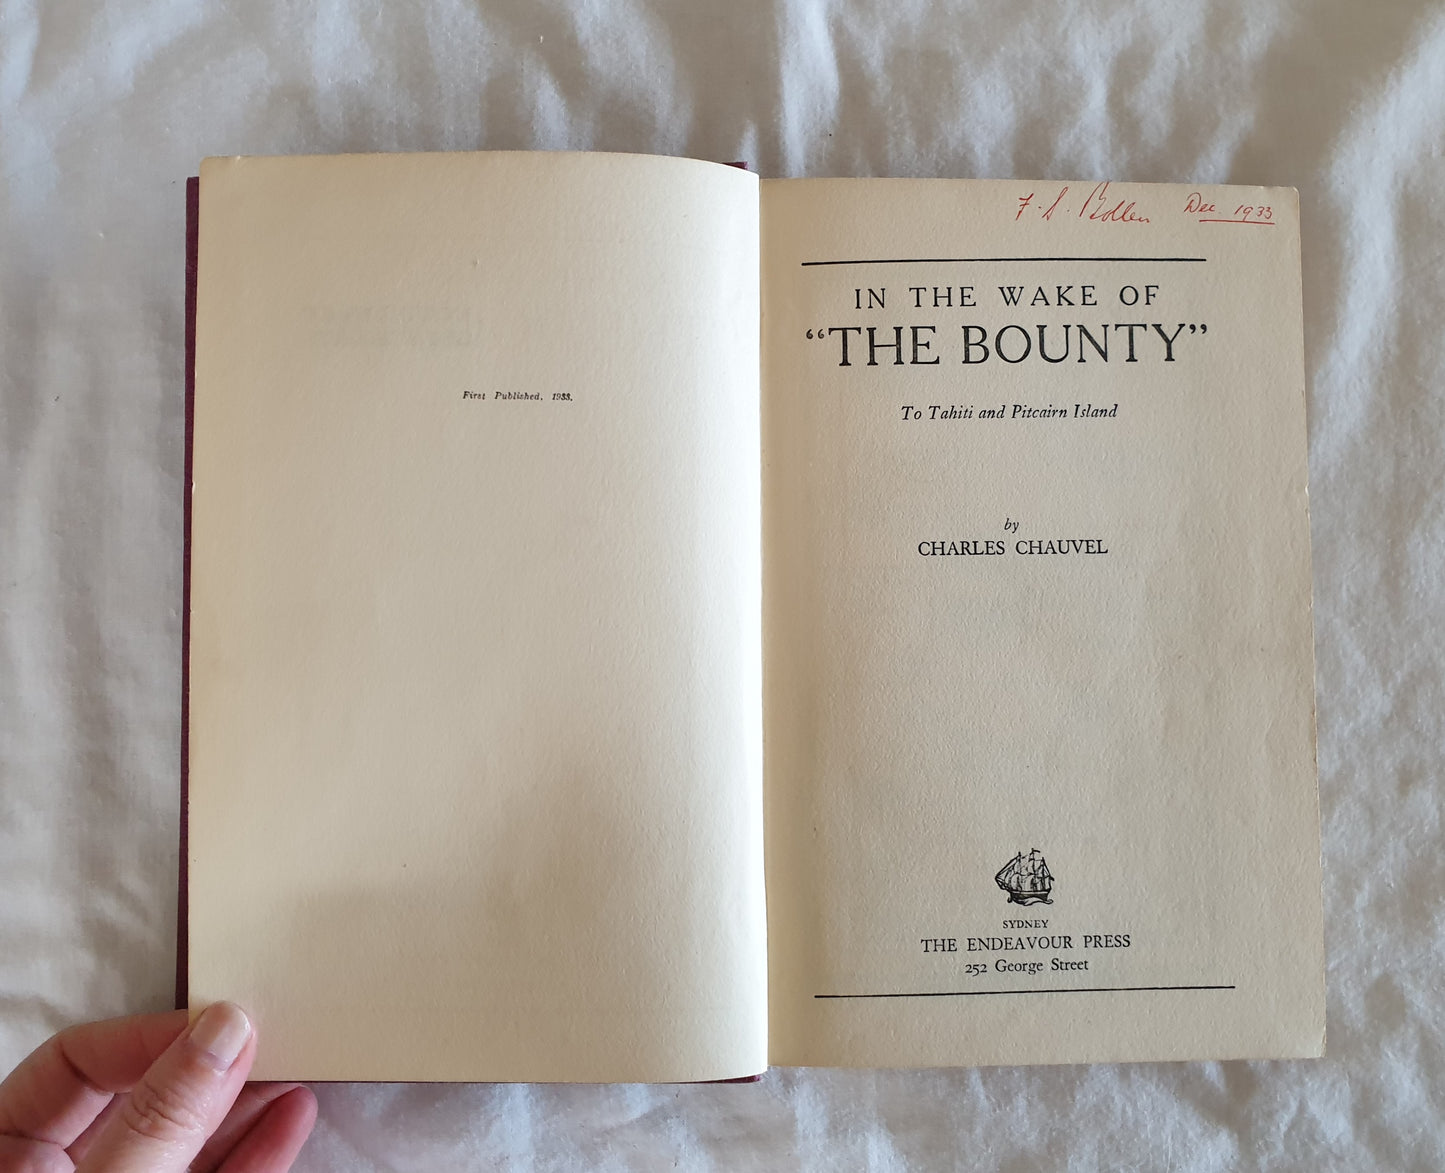 In The Wake of "The Bounty" by Charles Chauvel